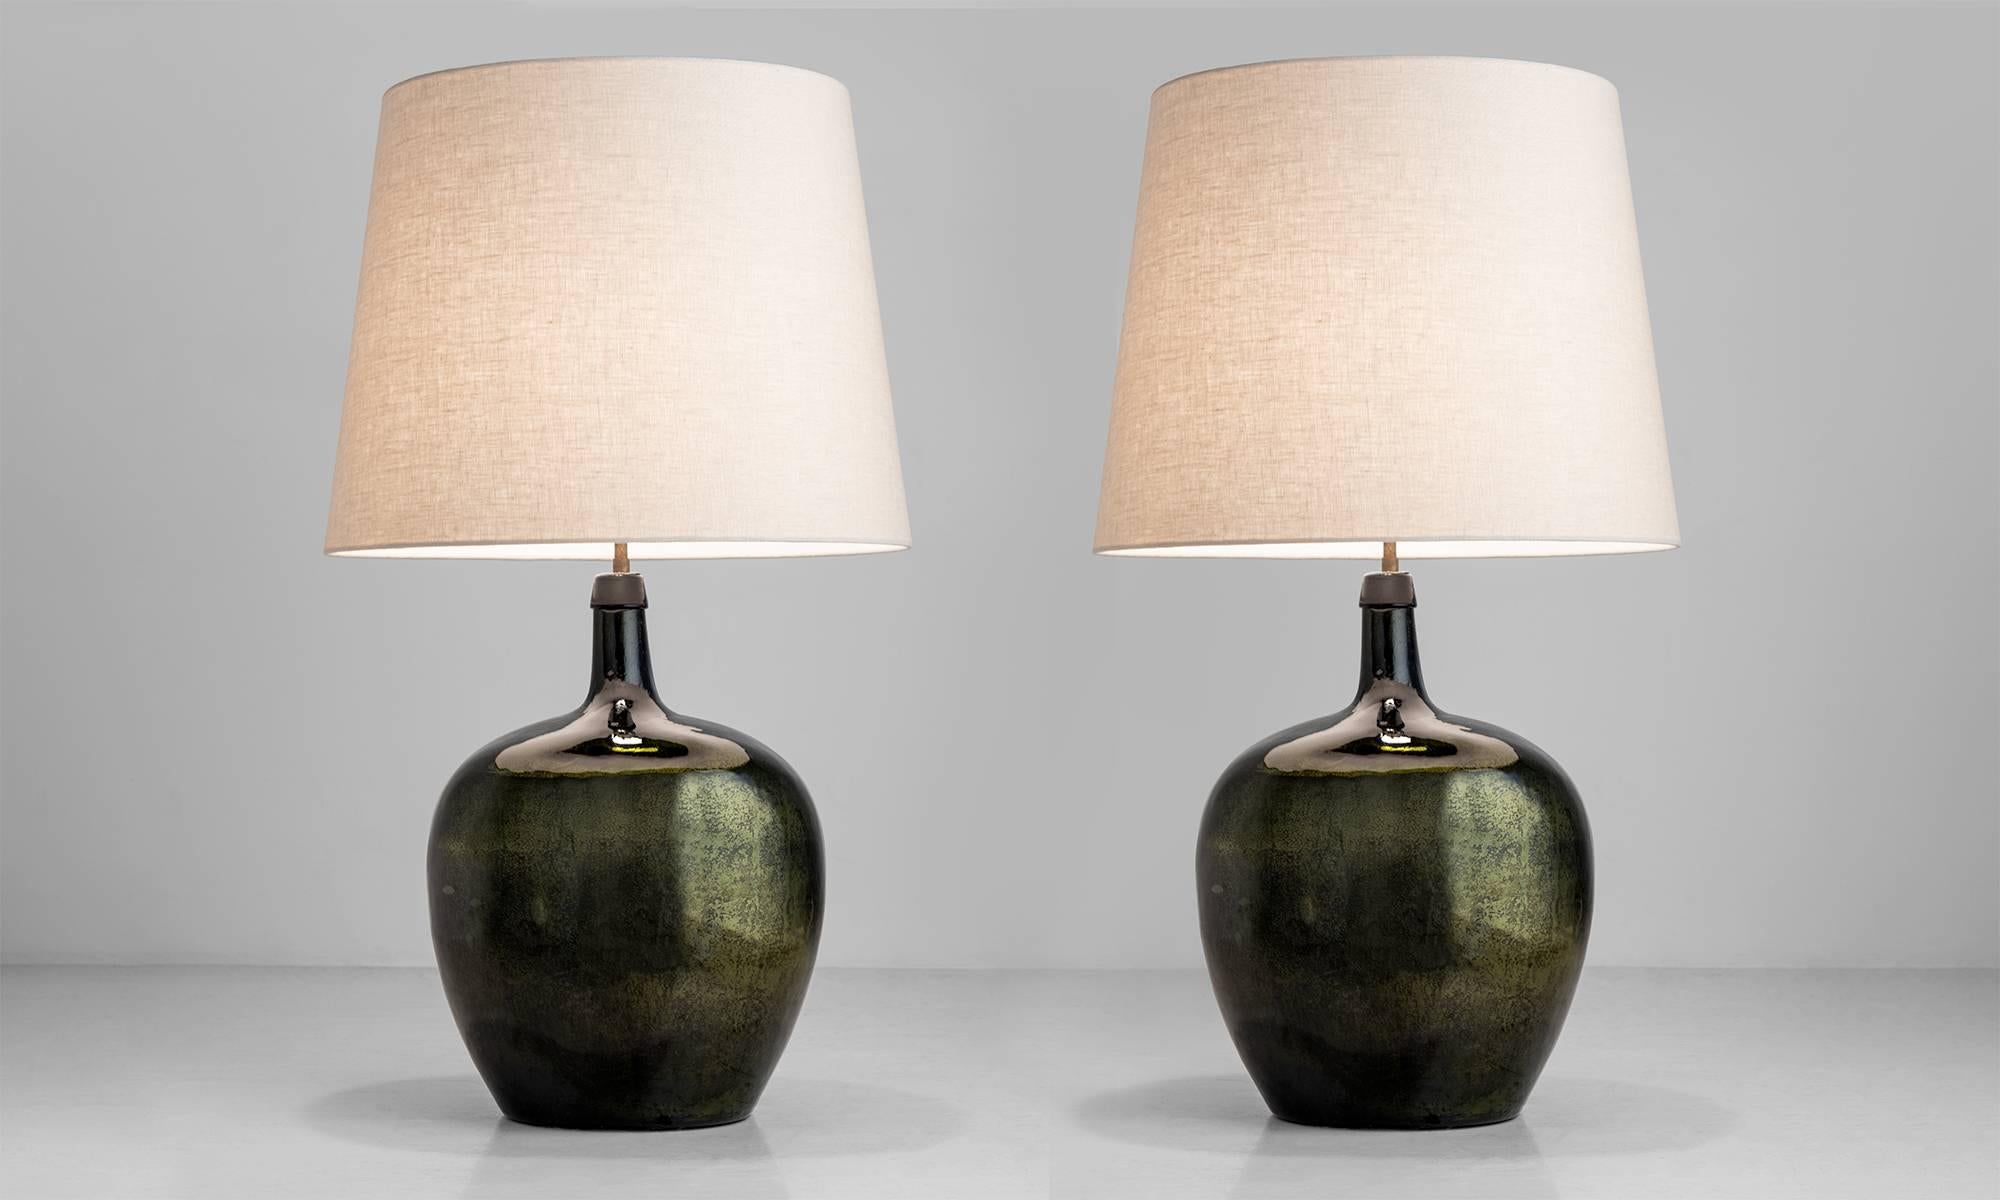 Pair of mottled mirrored lamps, England, circa 1940.

Base originally used as a chemical storage bottle features a beautiful patina and surface. Includes newly made shade.